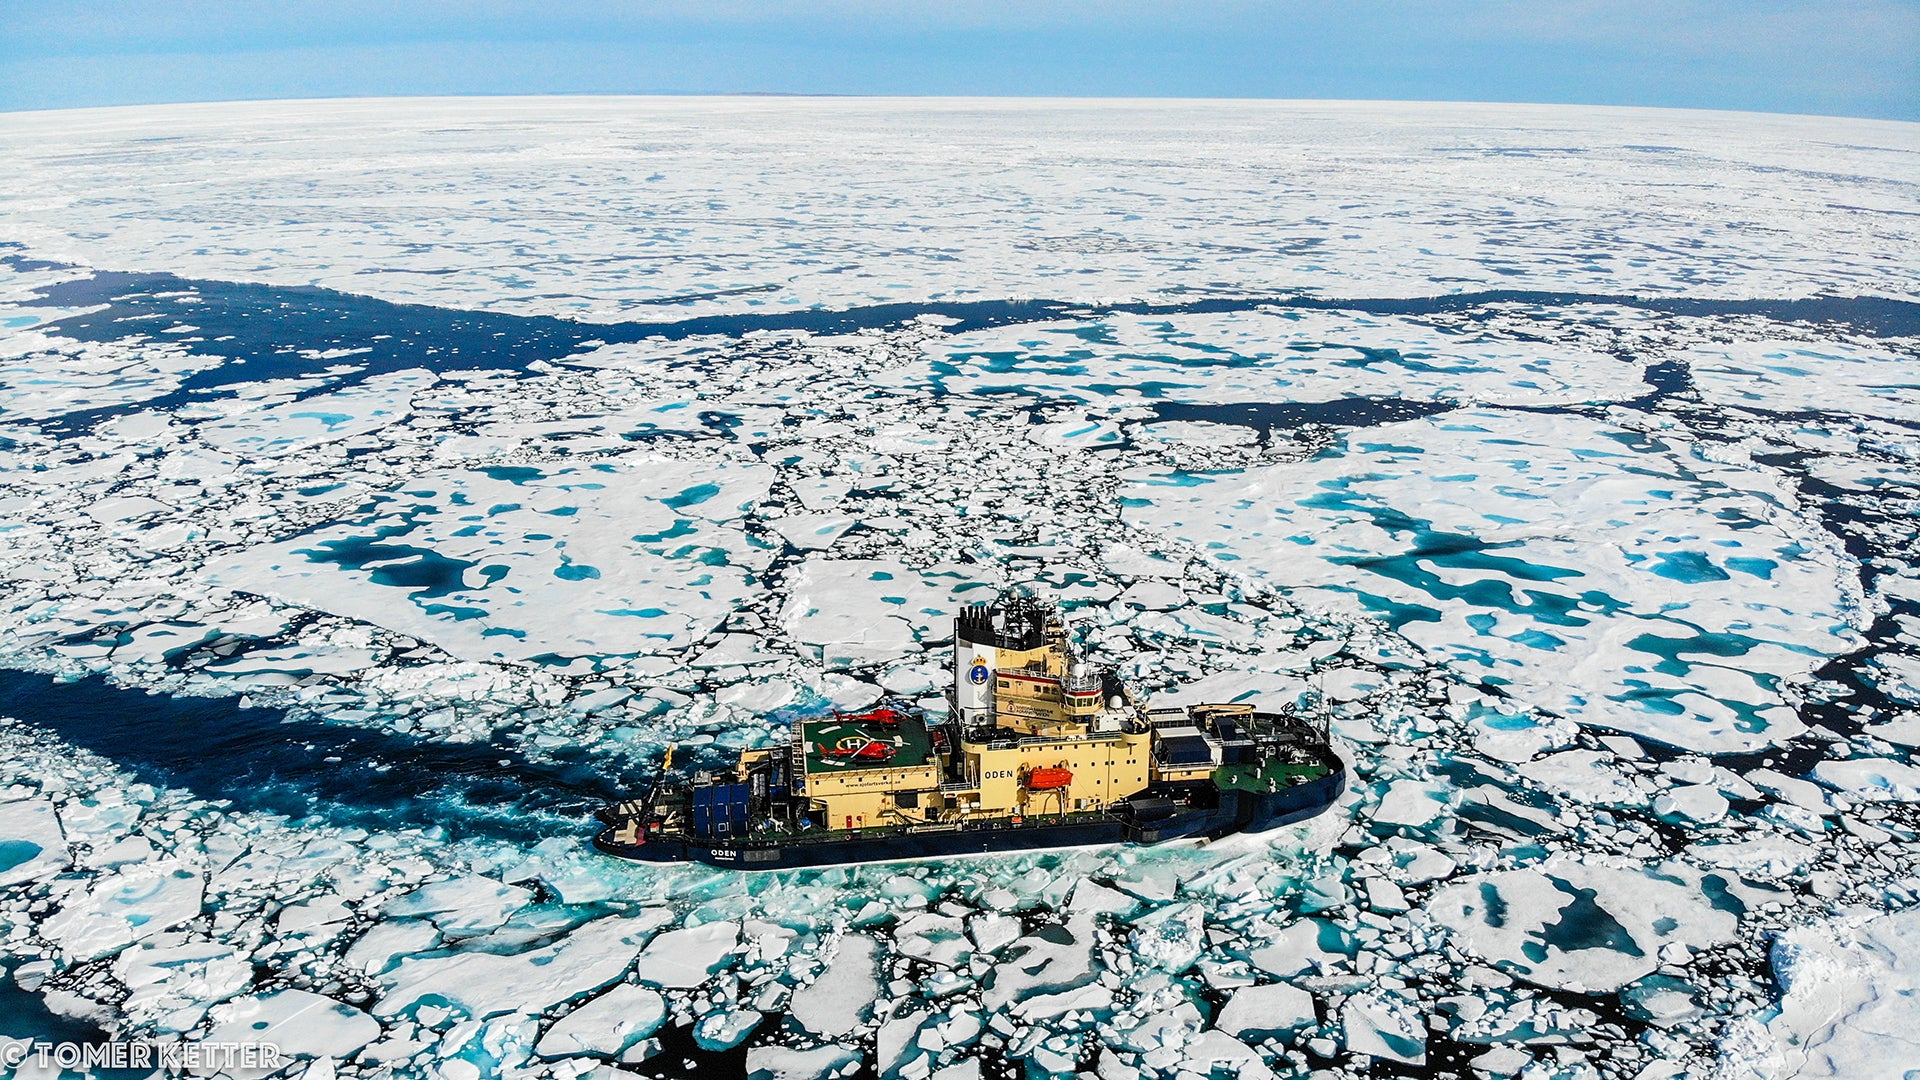 aerial photo of a black and yellow icebreaker vessel in the middle of an ice-covered sea.